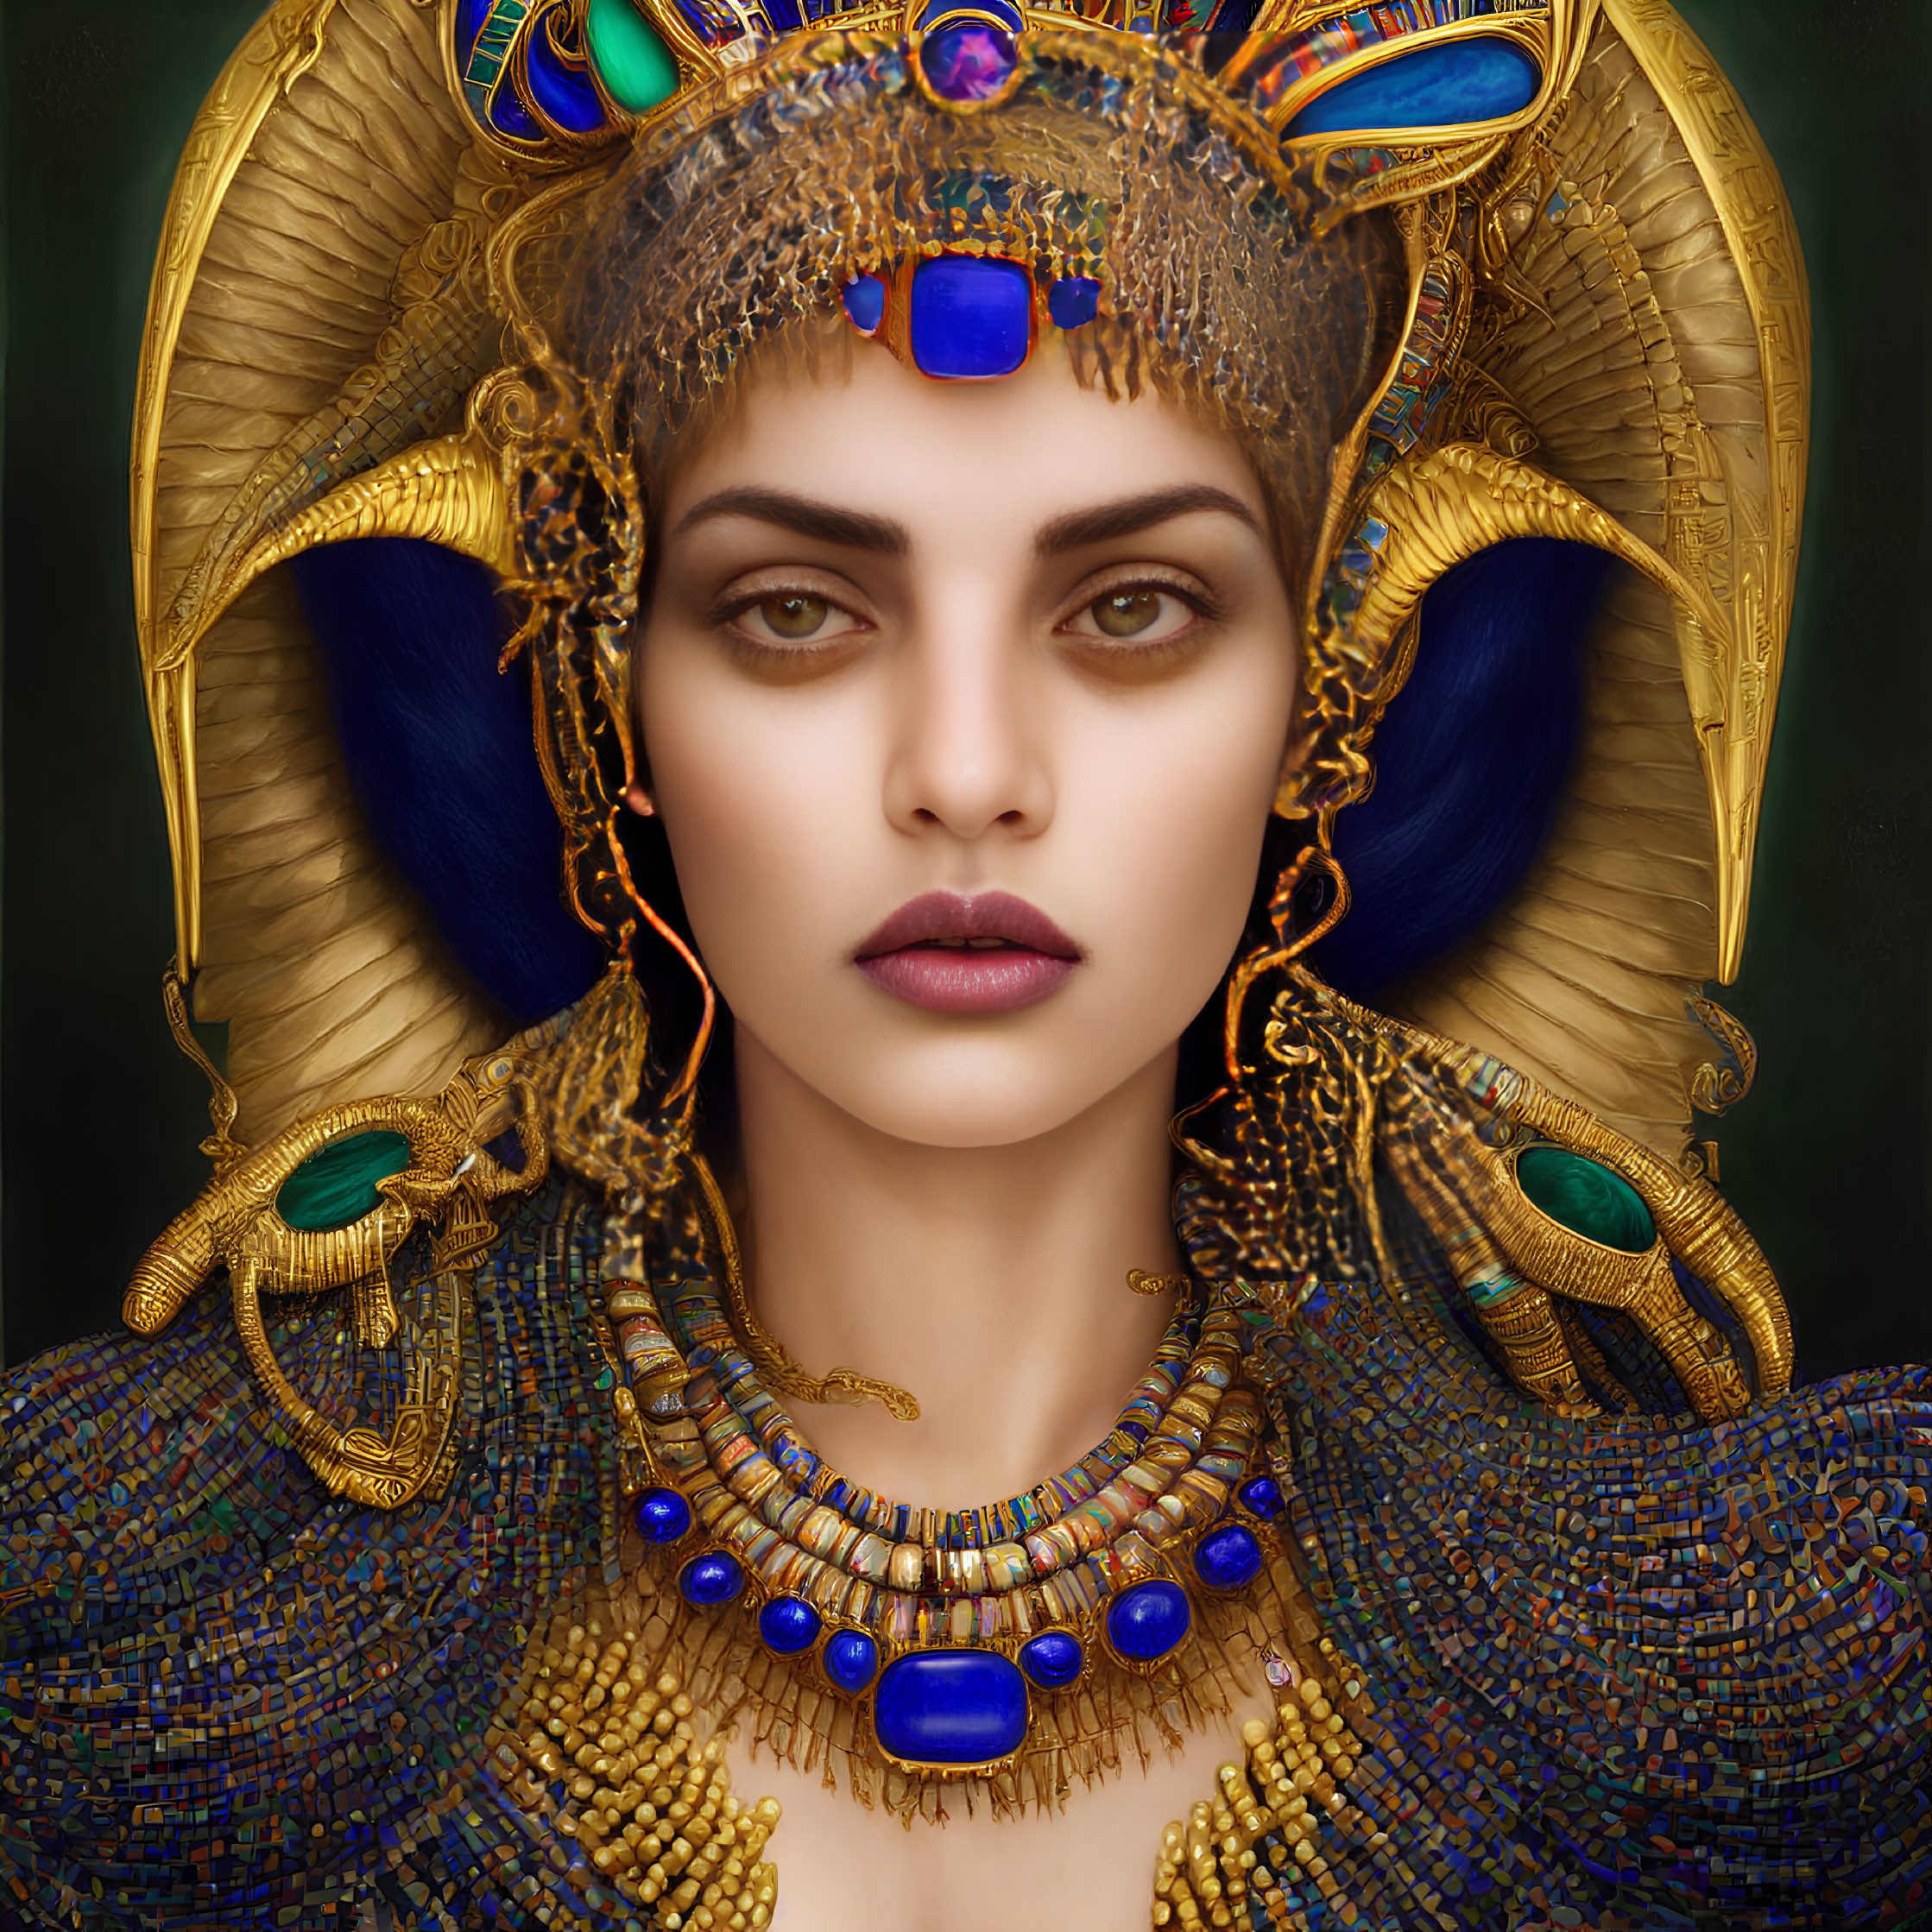 Digital artwork: Woman as Egyptian pharaoh with golden headdress and ornate jewelry